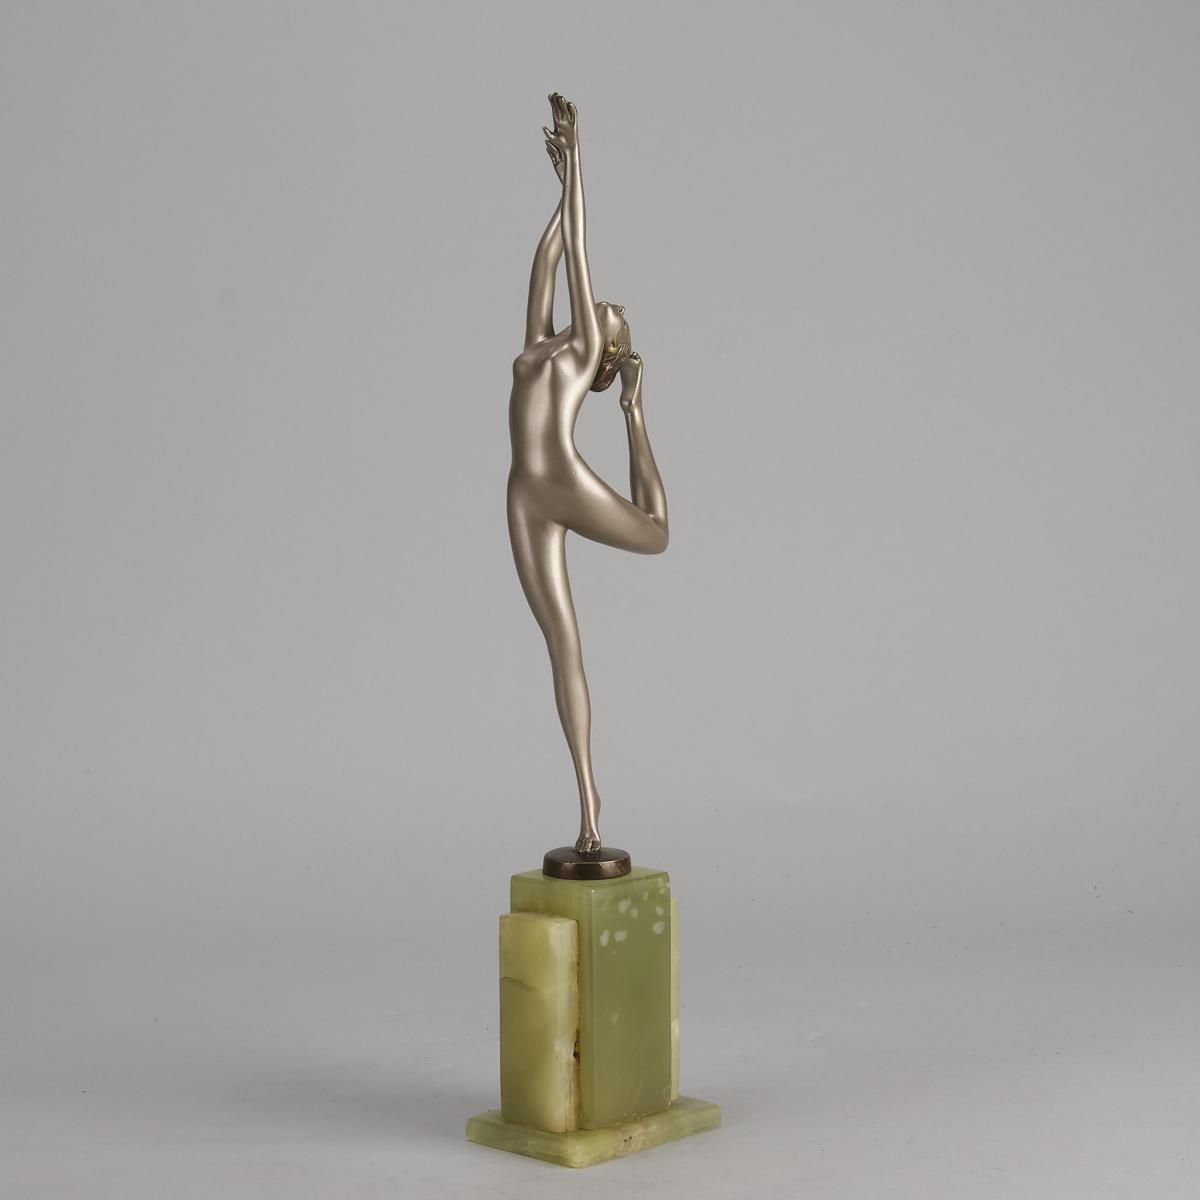  Early 20th Century Cold Painted Bronze Study entitled "Ectasy" by Josef Lorenzl